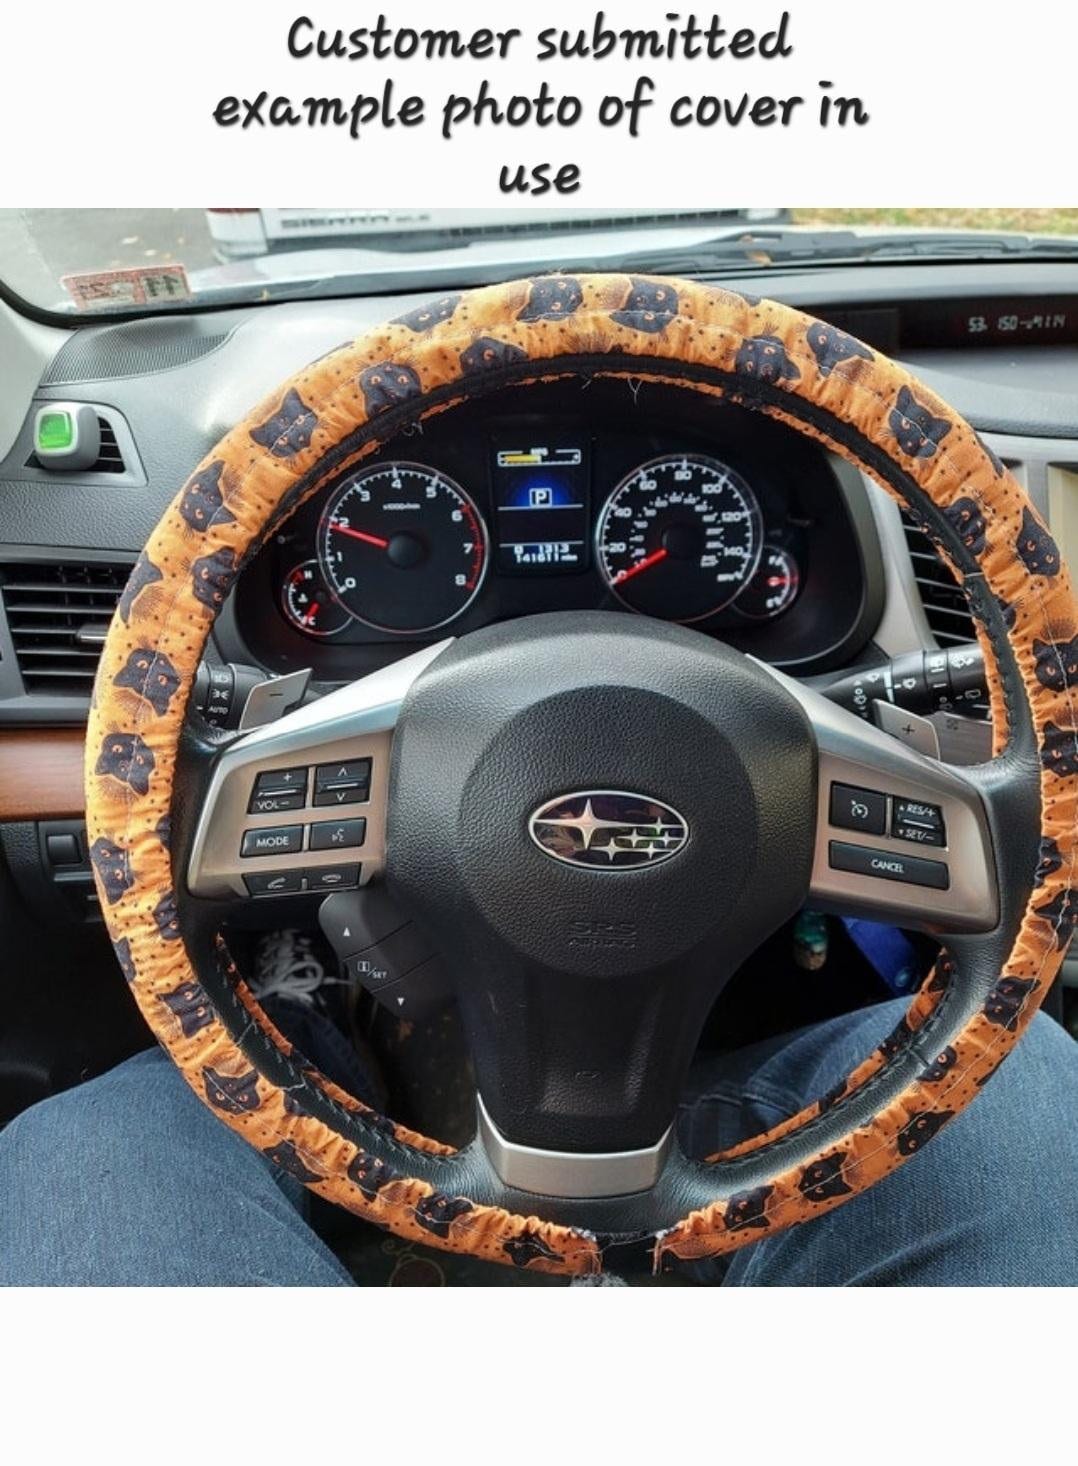 Vibrant Floral Steering Wheel Cover, 100% Cotton, Washable, Custom Car Accessories - Harlow's Store and Garden Gifts